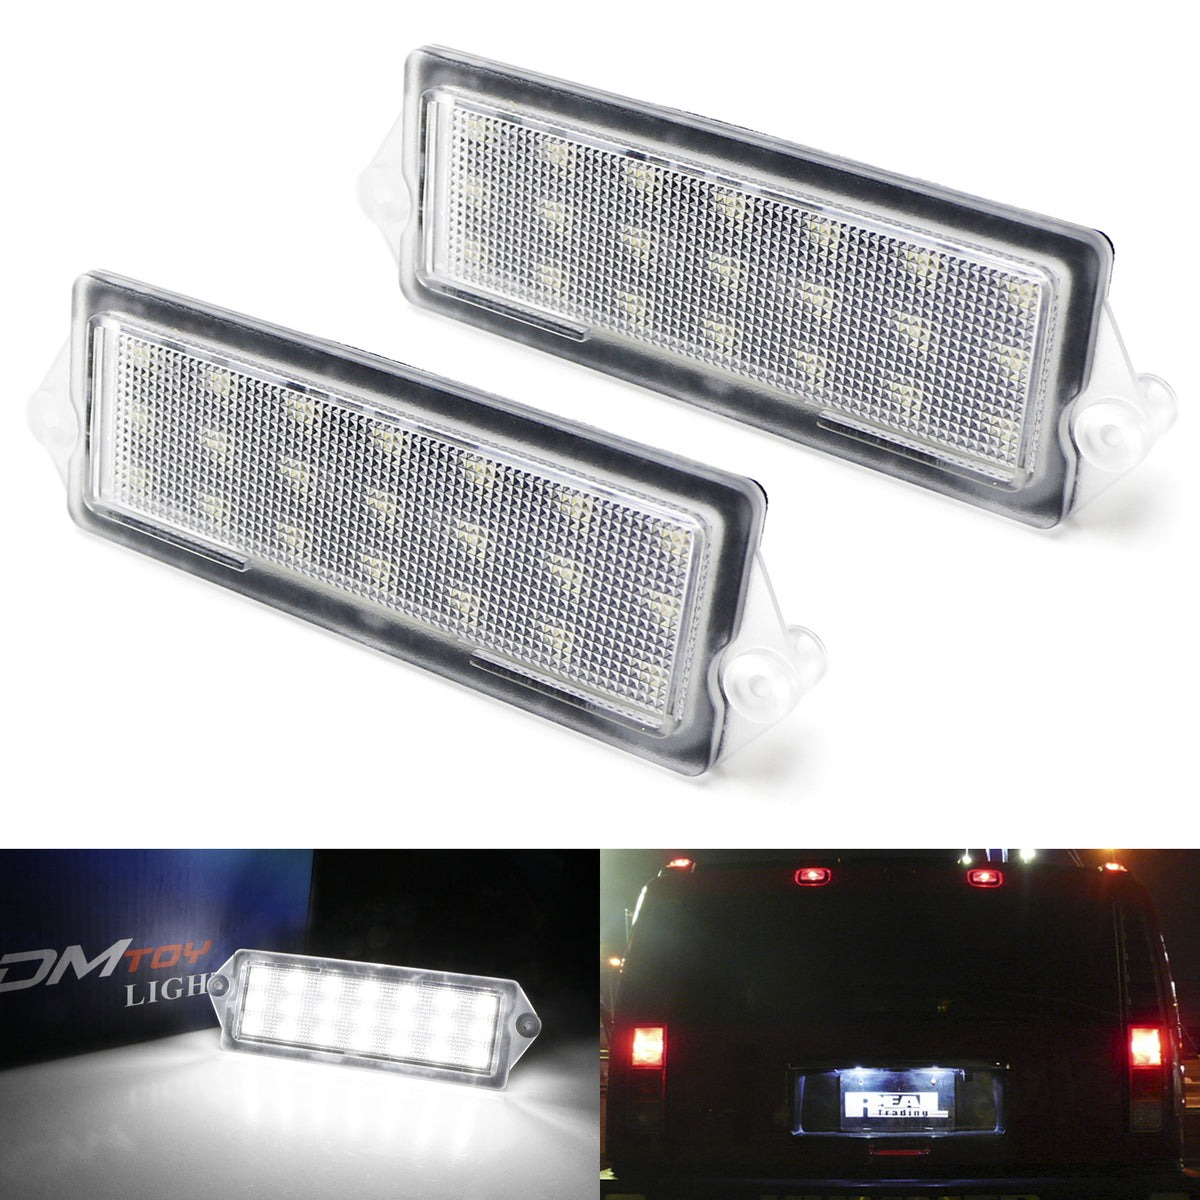 03-07 Hummer H2 Rear Lift Gate Lamp OE-Fit White License Plate Lights — 